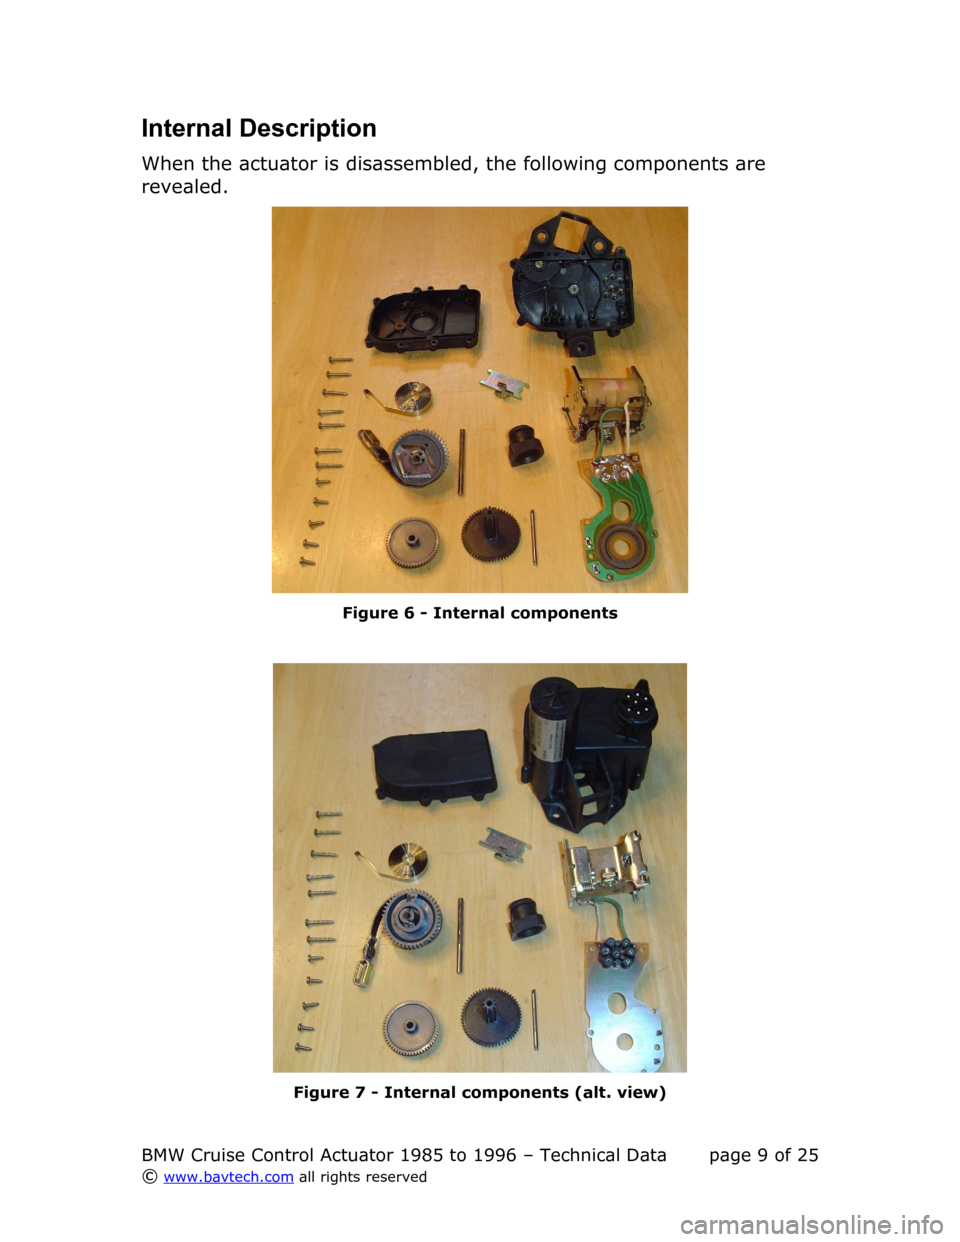 BMW 5 SERIES 1995 E34 Cruise Control Acutator Internal Description
When the actuator is disassembled, the following components are  
revealed.
Figure  6  - Internal components
Figure  7  - Internal components (alt. view)
BMW Cruise Control Actuat